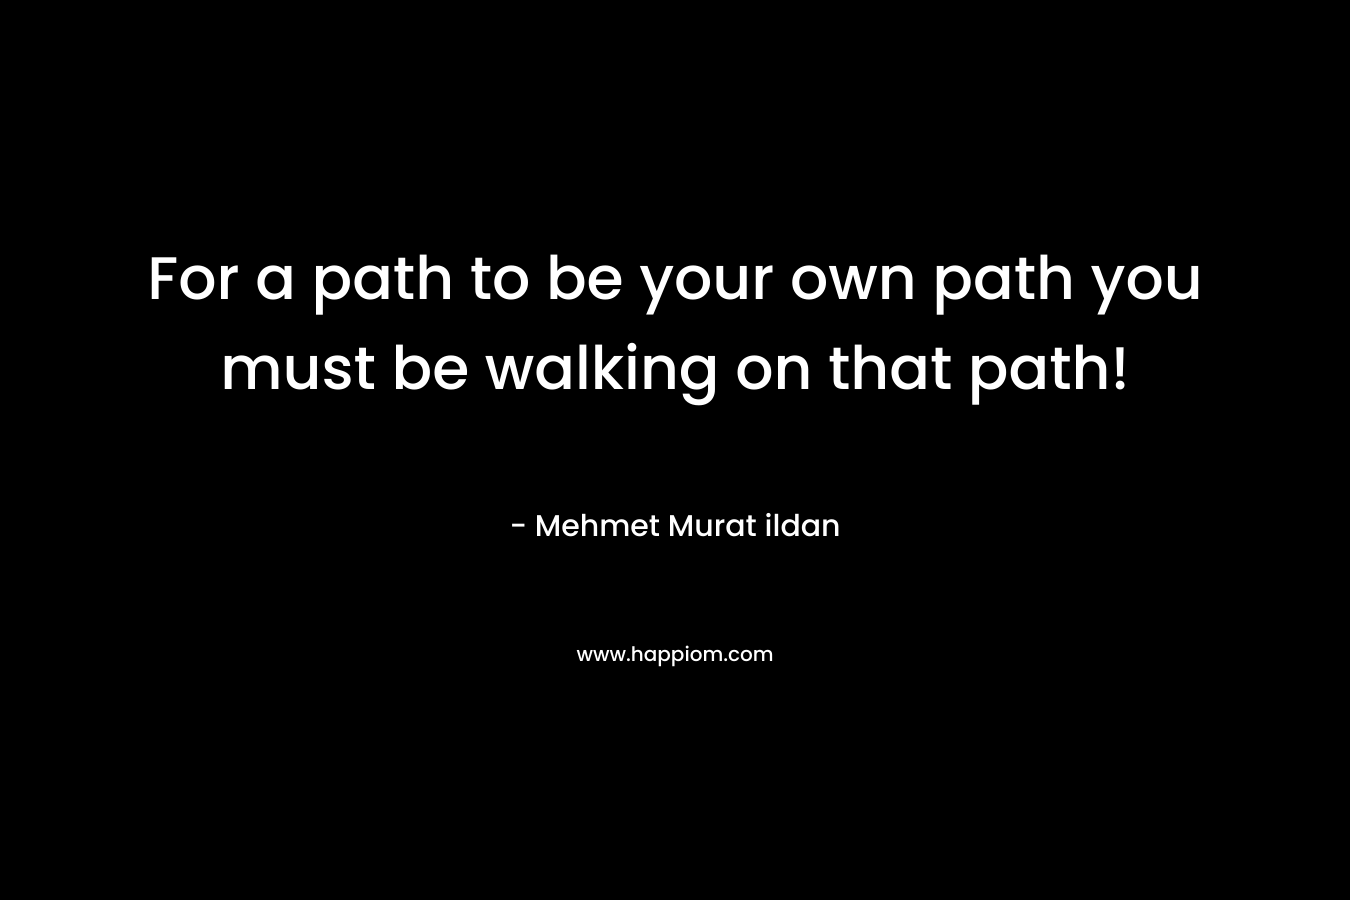 For a path to be your own path you must be walking on that path!